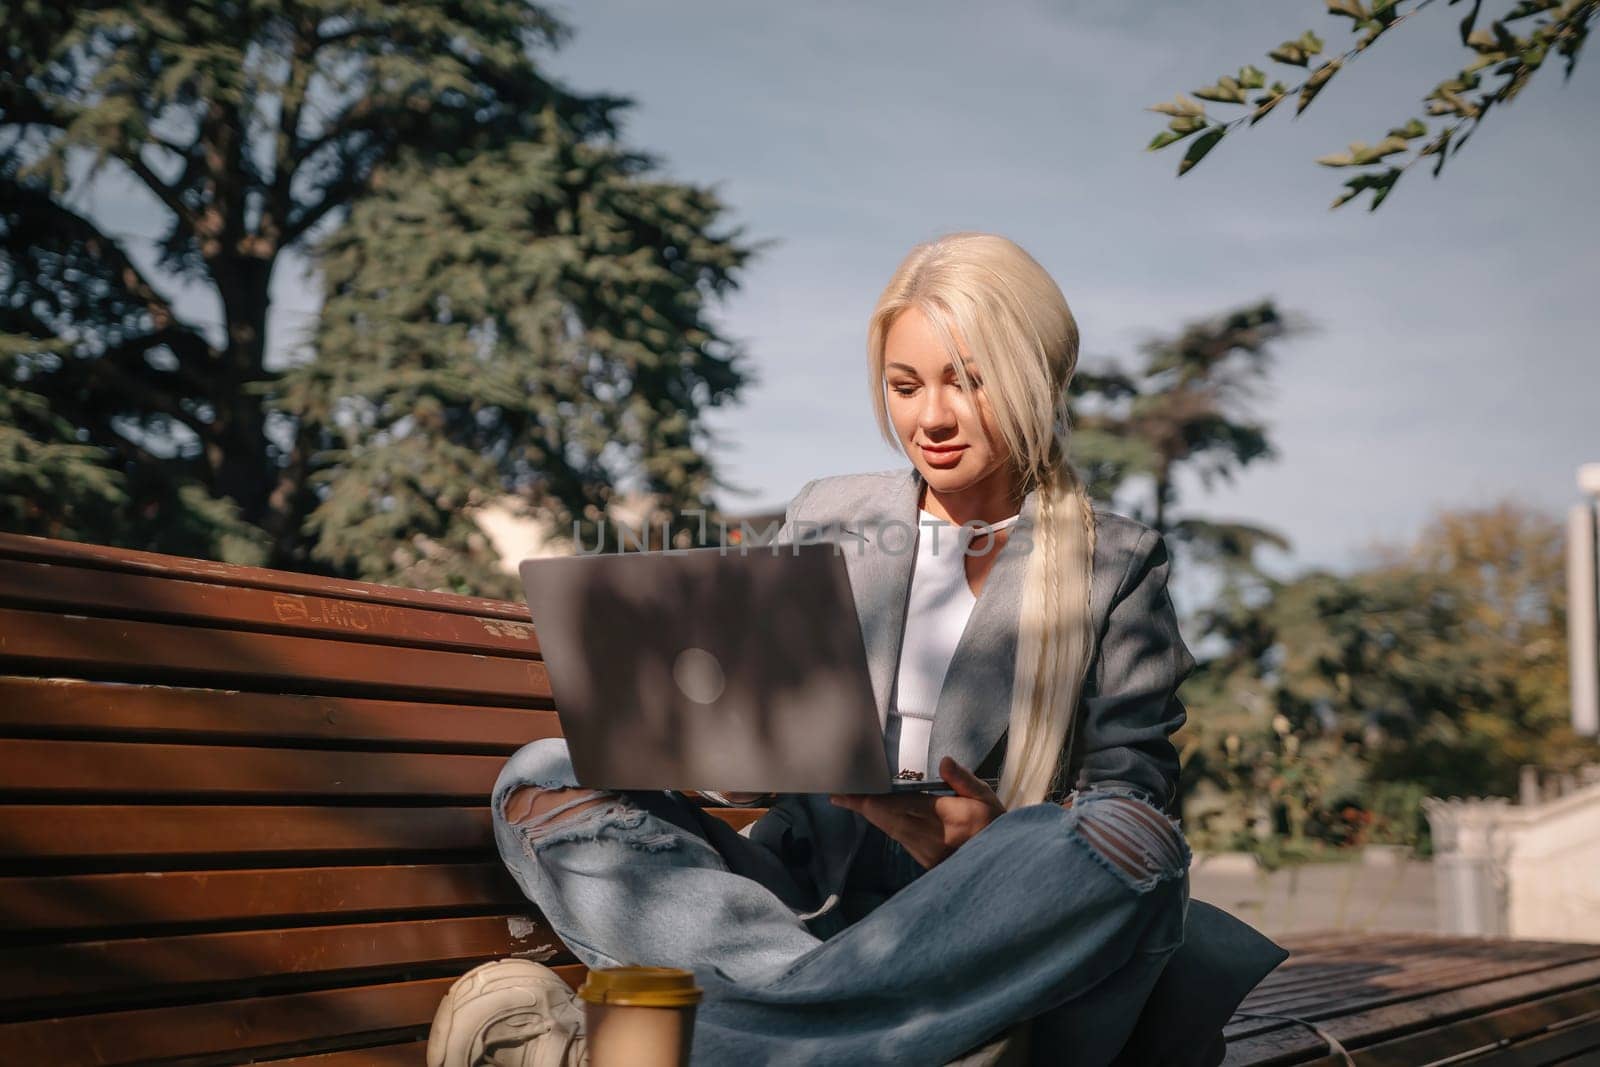 A blonde woman sits on a bench with a laptop in front of her. She is wearing a gray jacket and jeans. The scene suggests a casual and relaxed atmosphere, as the woman is using her laptop outdoors